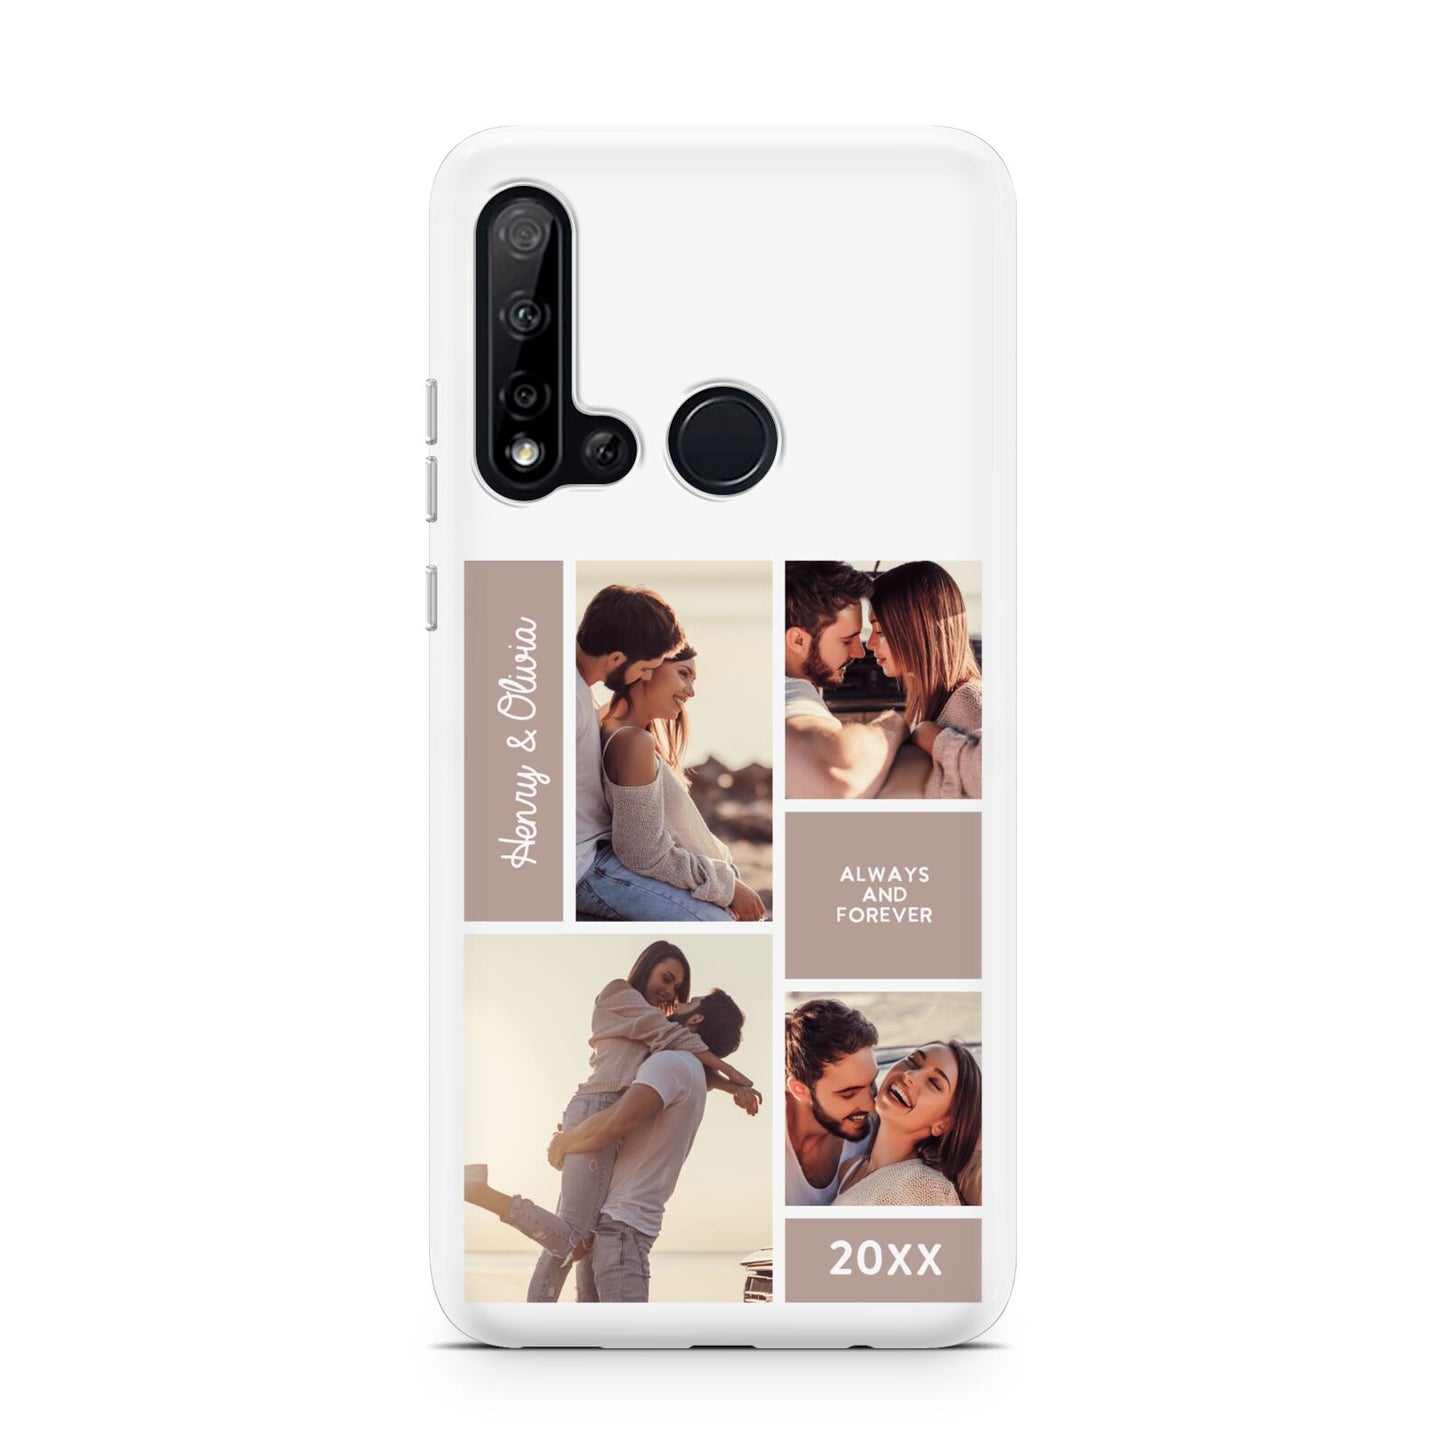 Couples Valentine Photo Collage Personalised Huawei P20 Lite 5G Phone Case